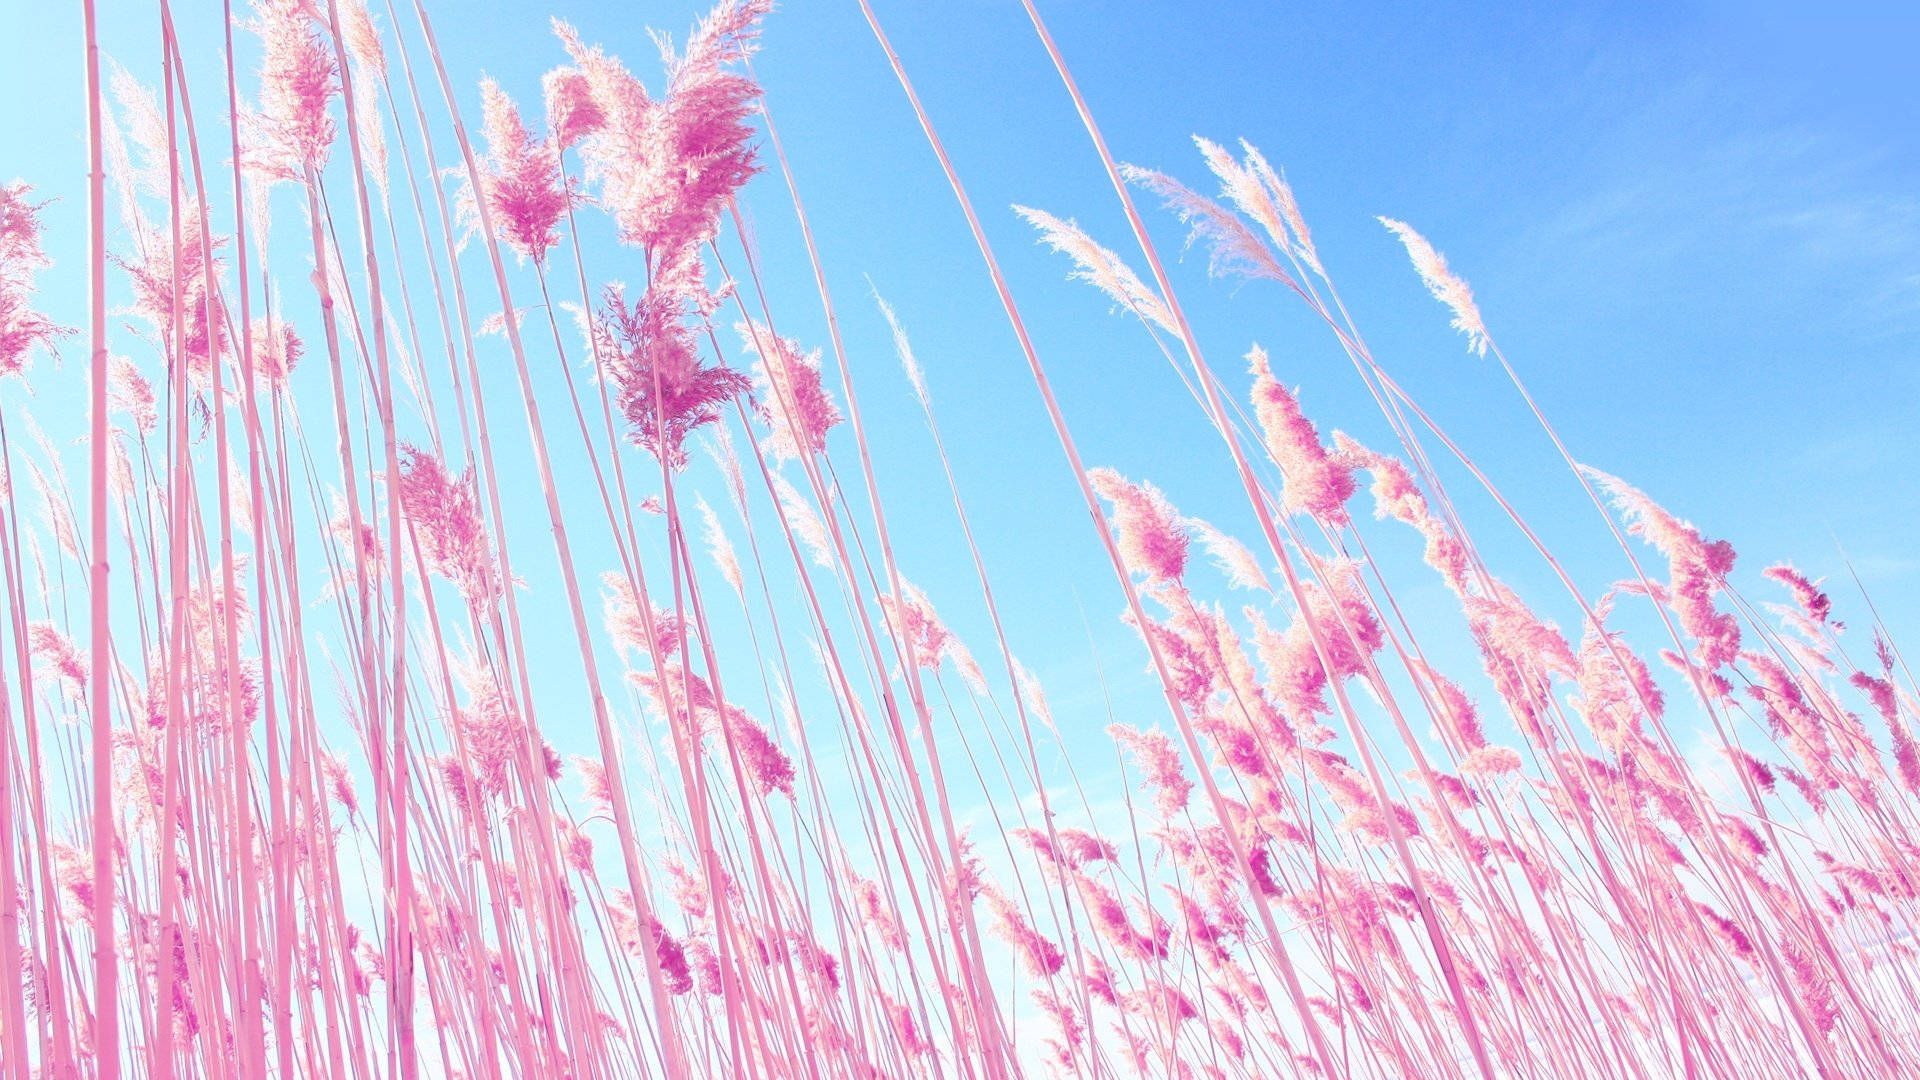 A field of tall pink flowers in the sun - Pastel